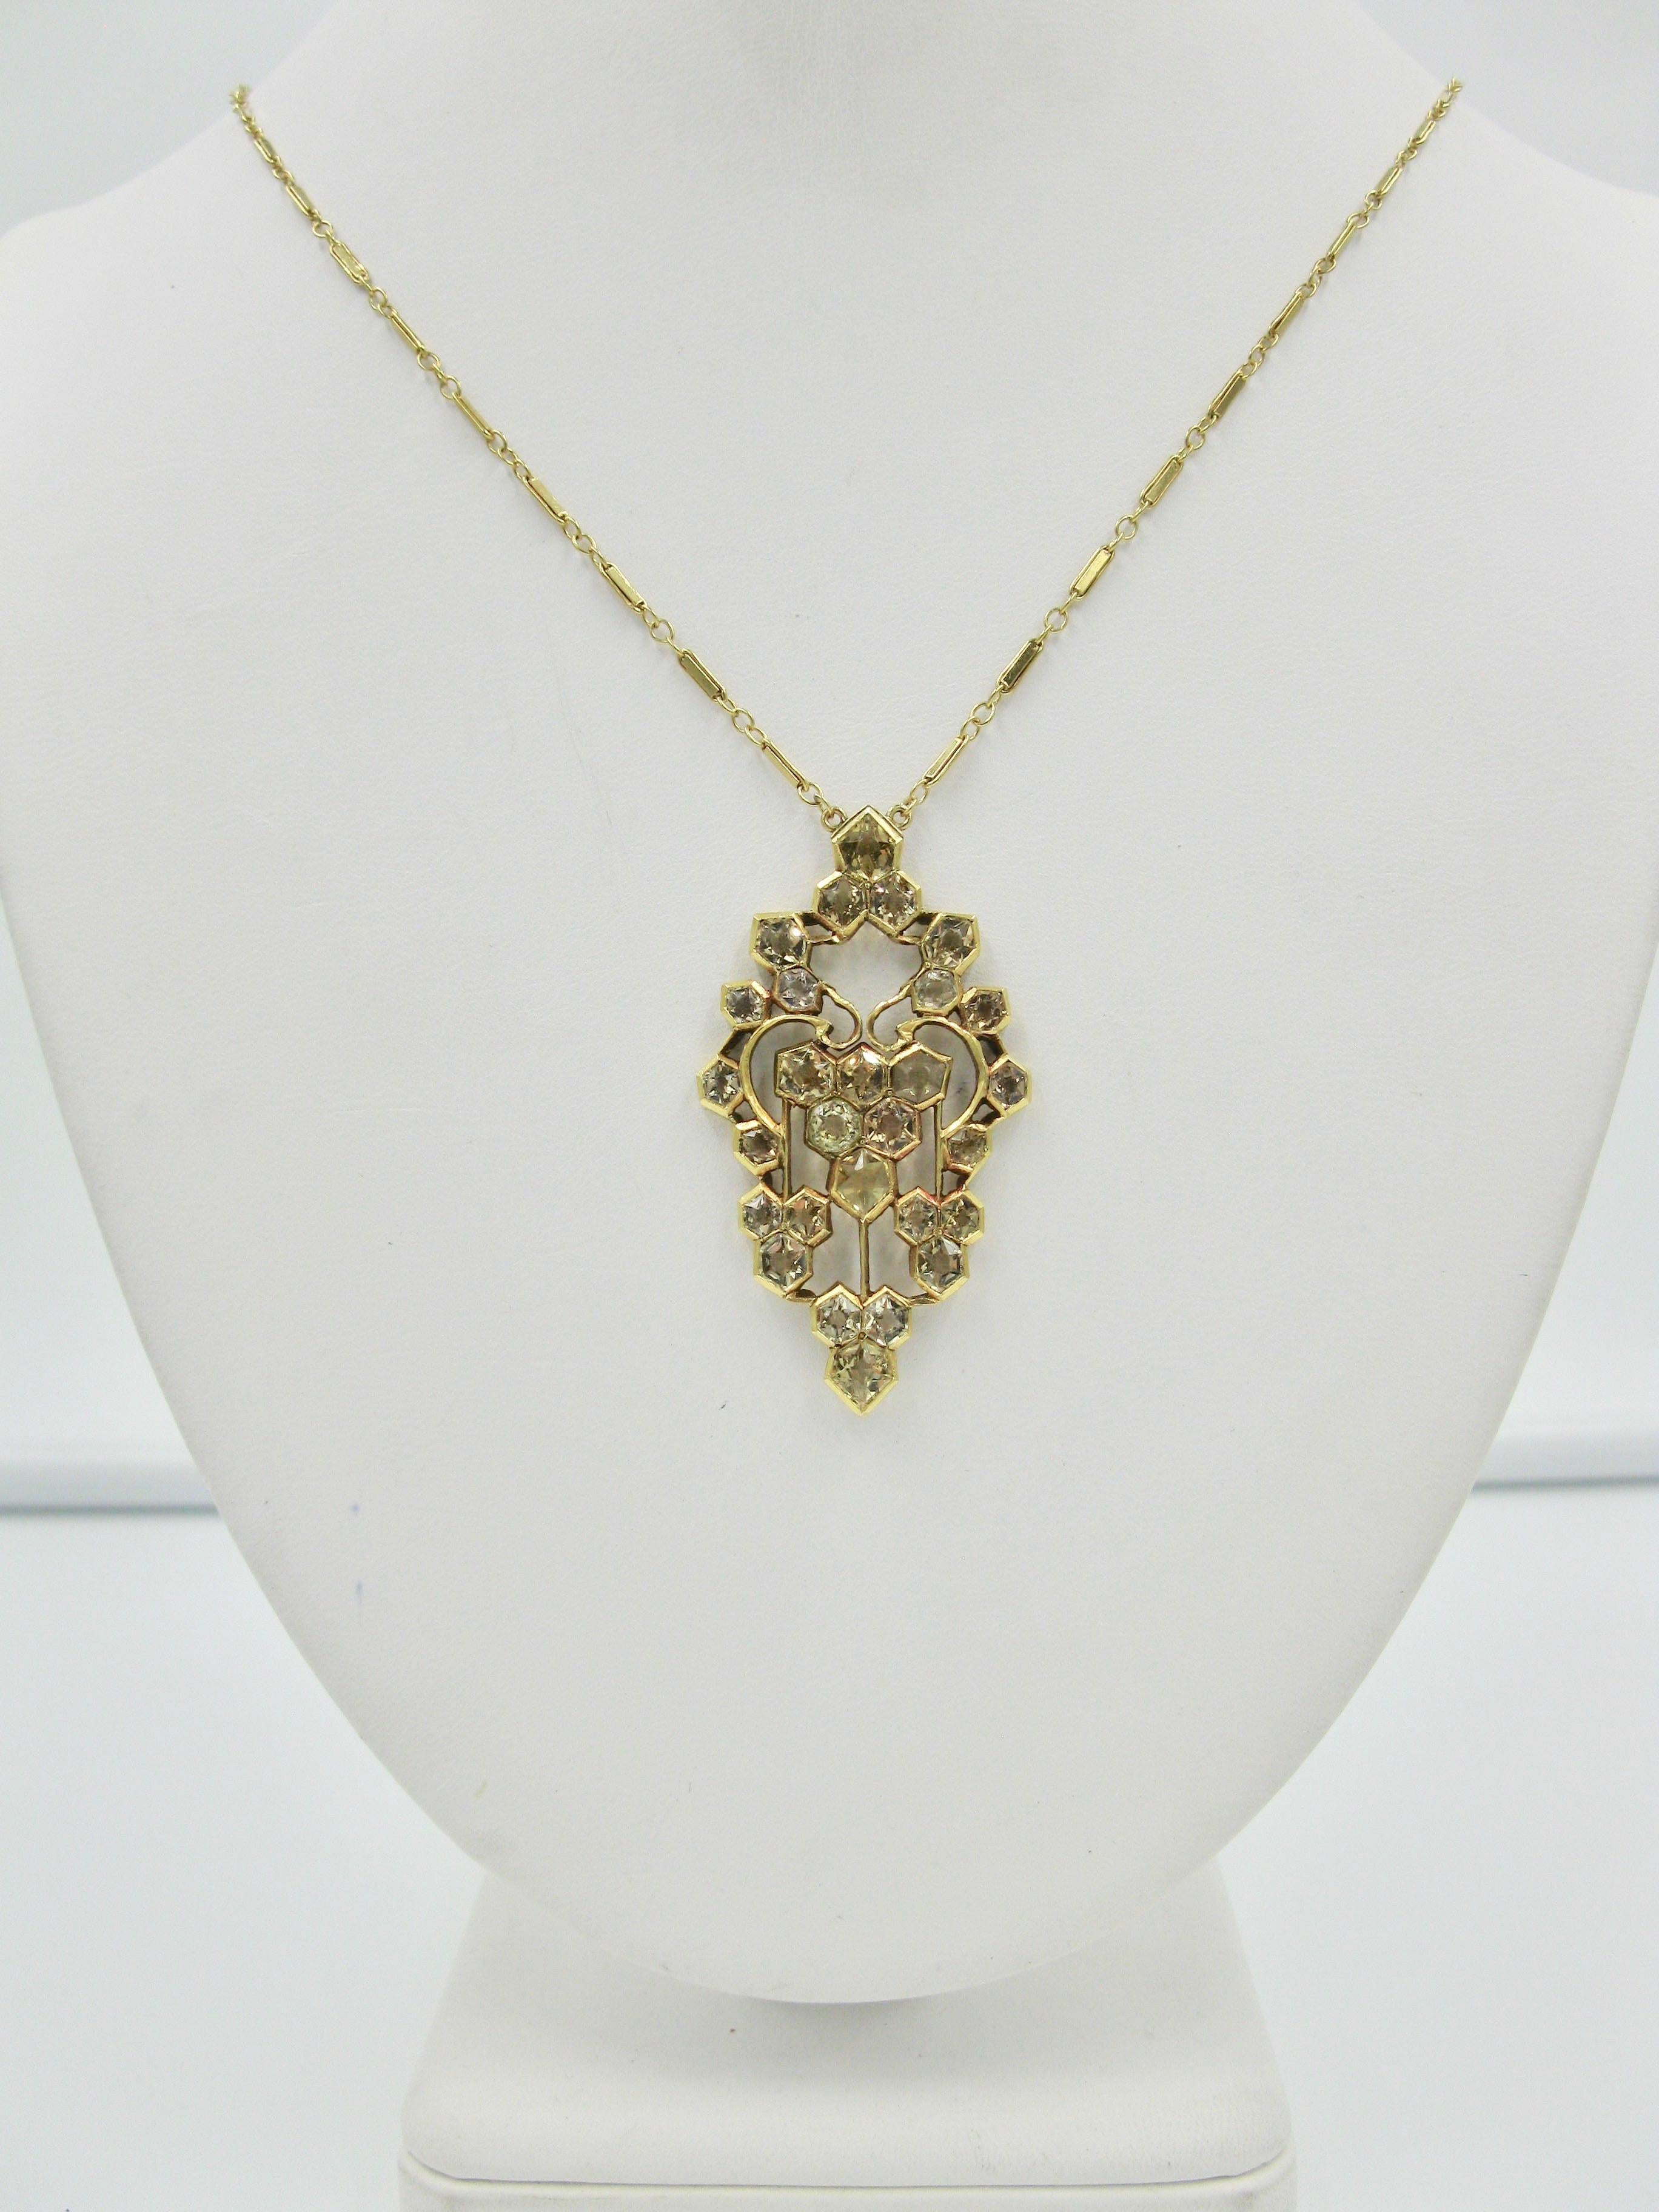 Citrine 14 Karat Yellow Gold Art Deco Pendant Necklace Antique, circa 1920 In Excellent Condition For Sale In New York, NY